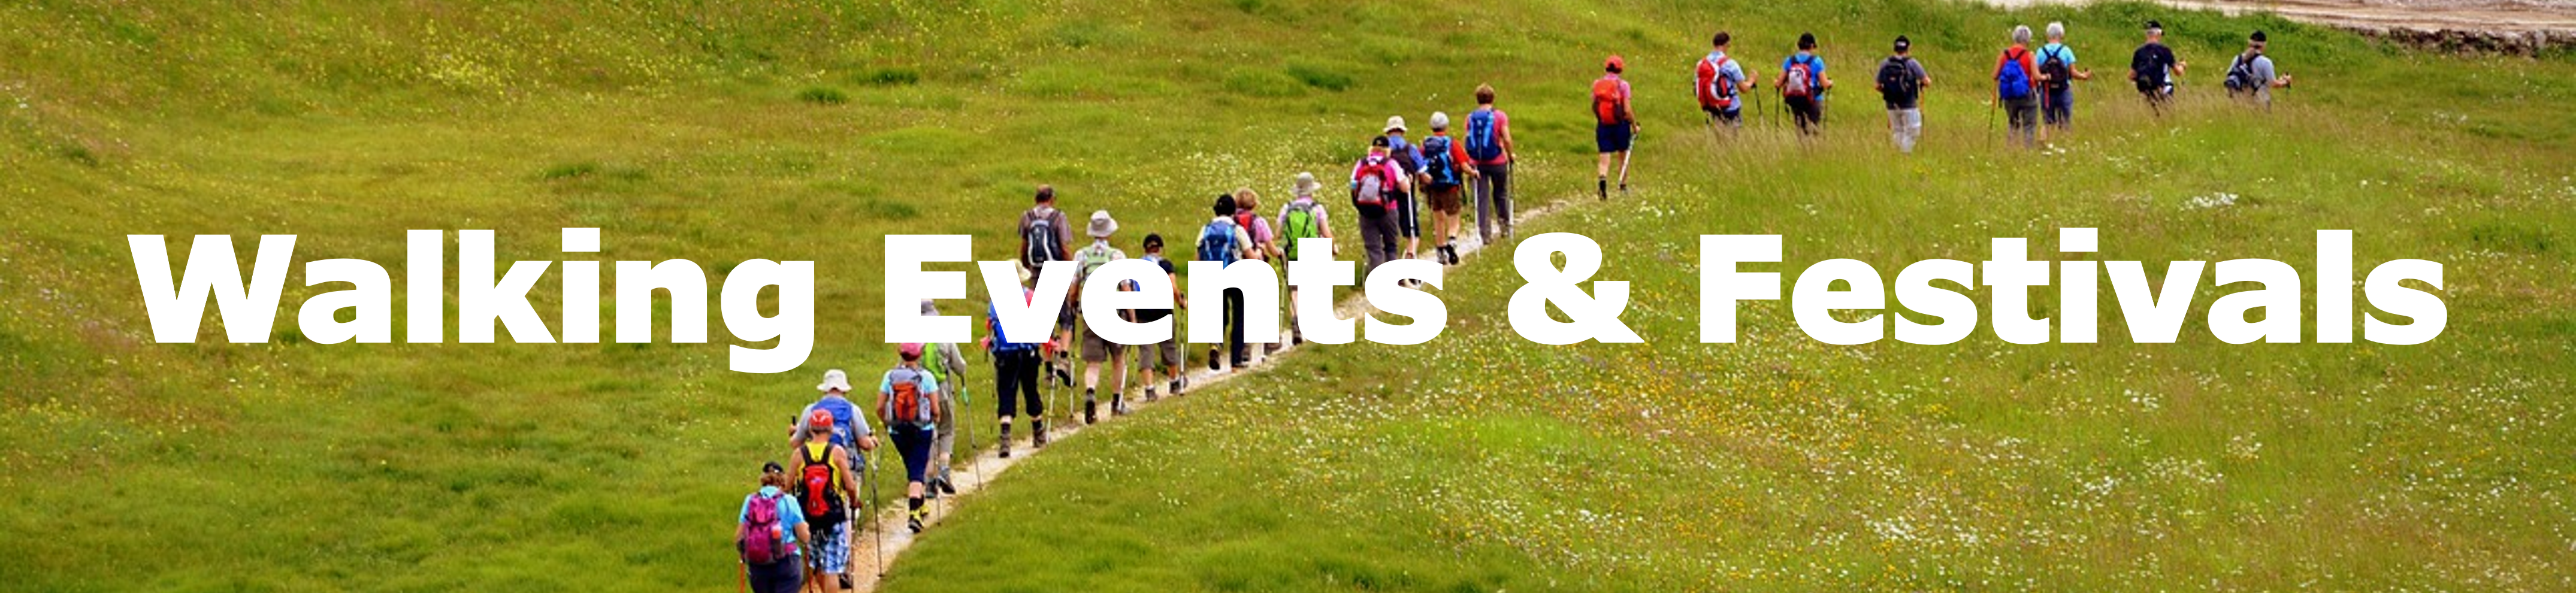 Walking Events and Festivals 2